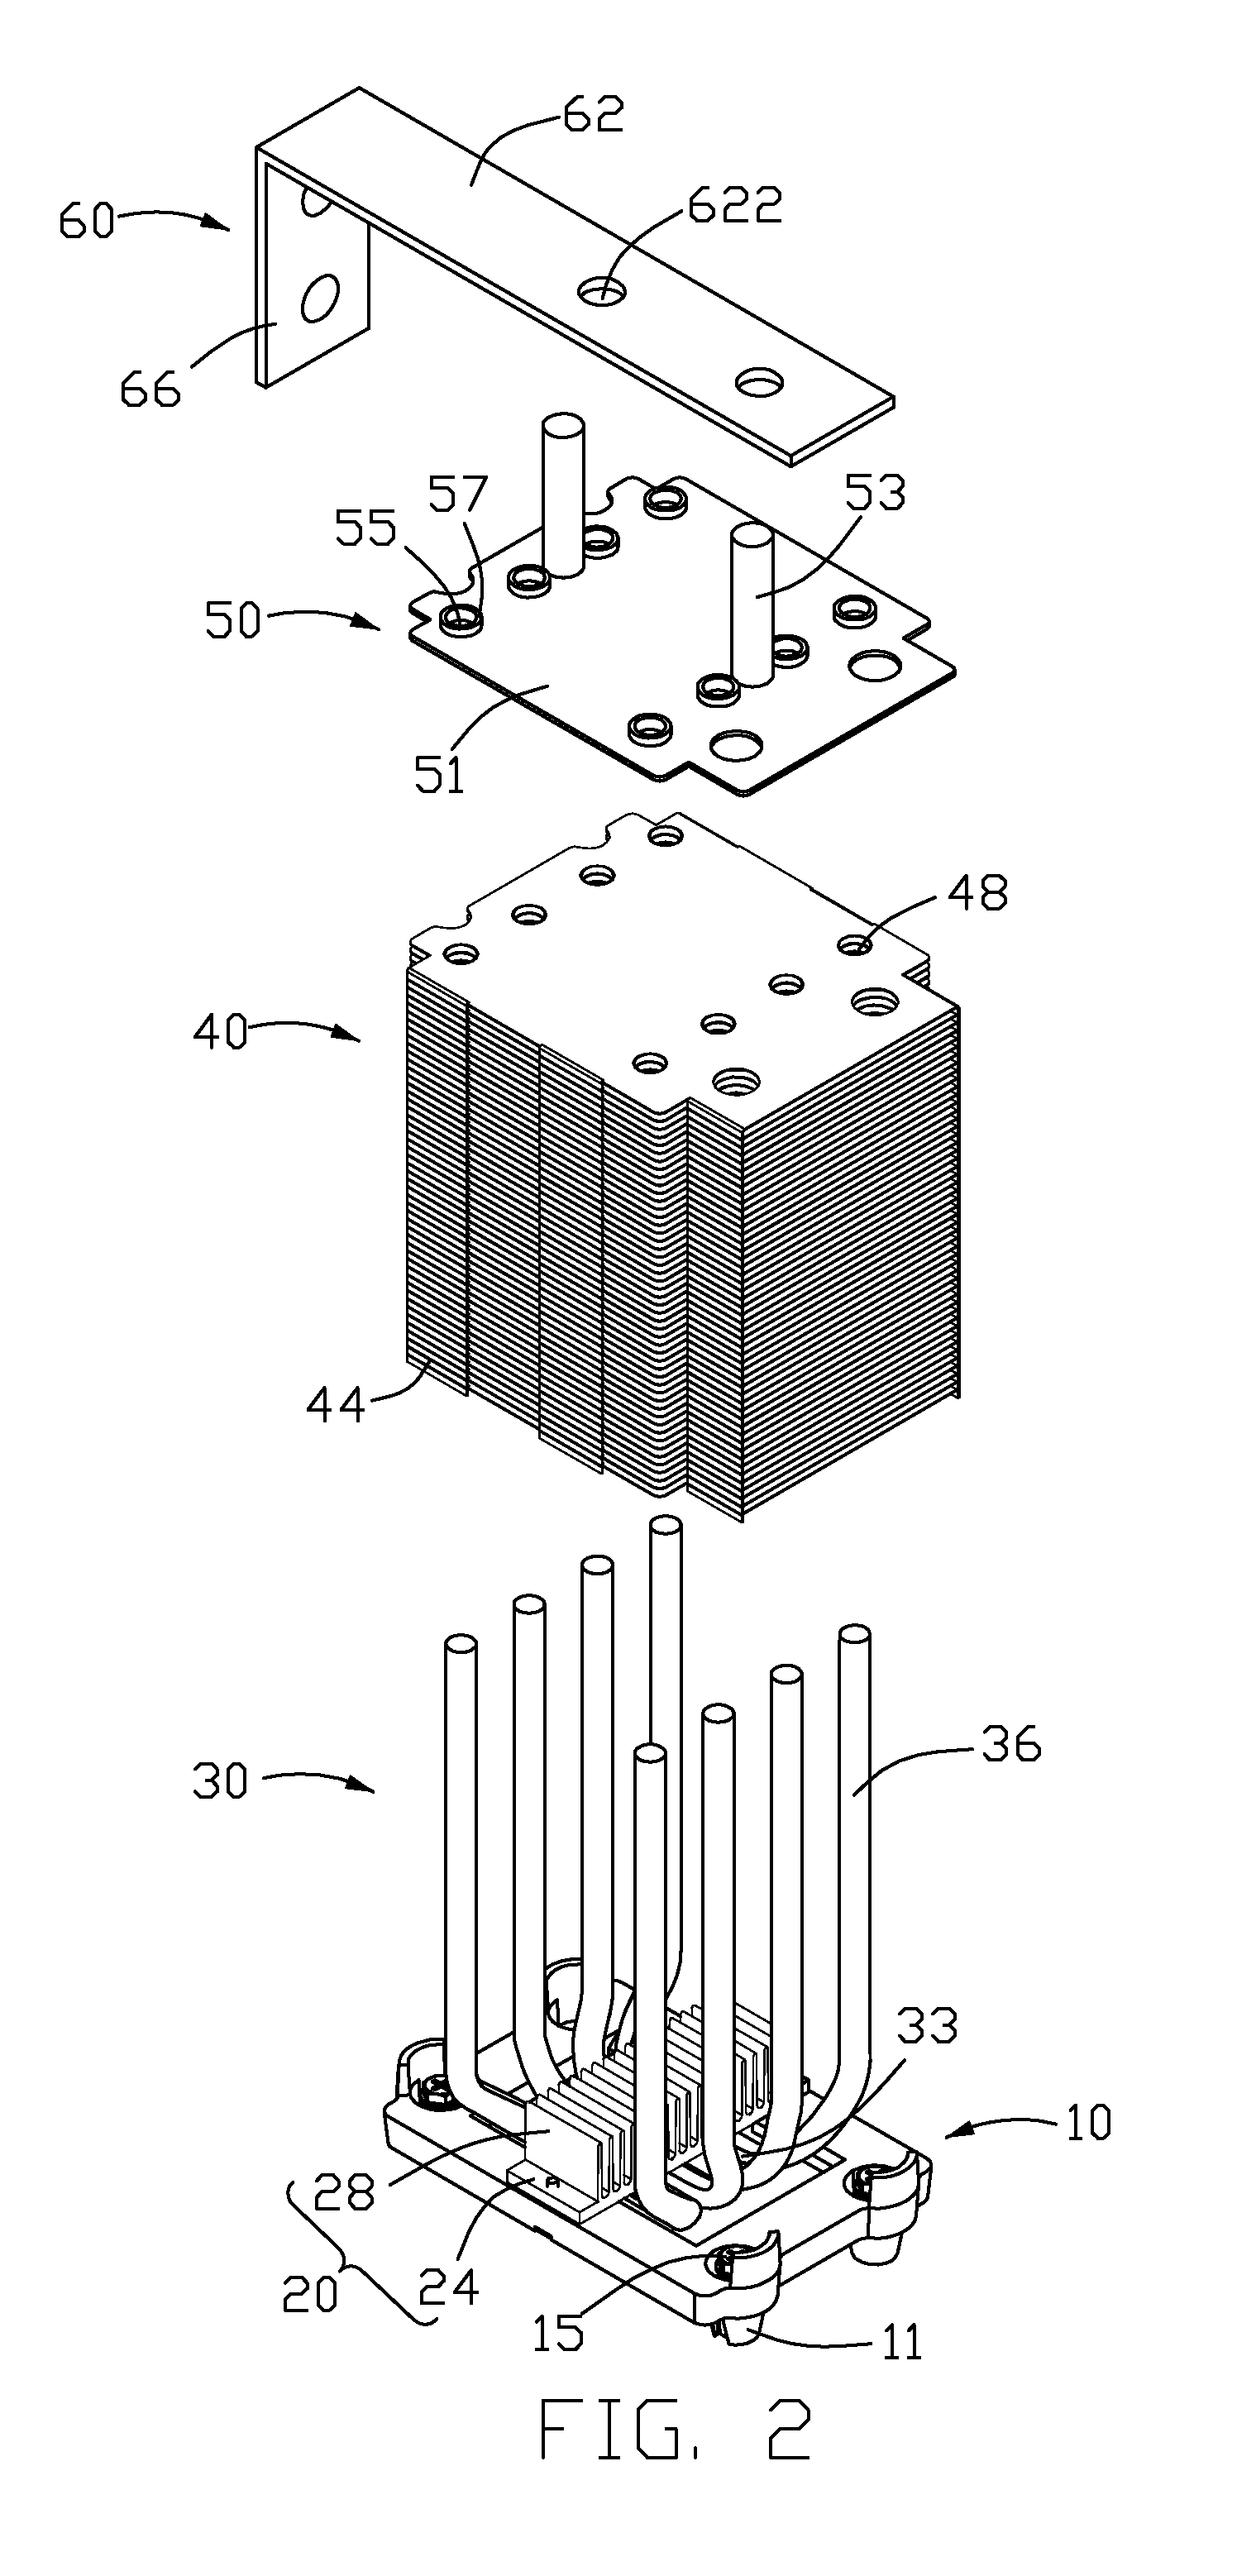 Electronic system with a heat sink assembly